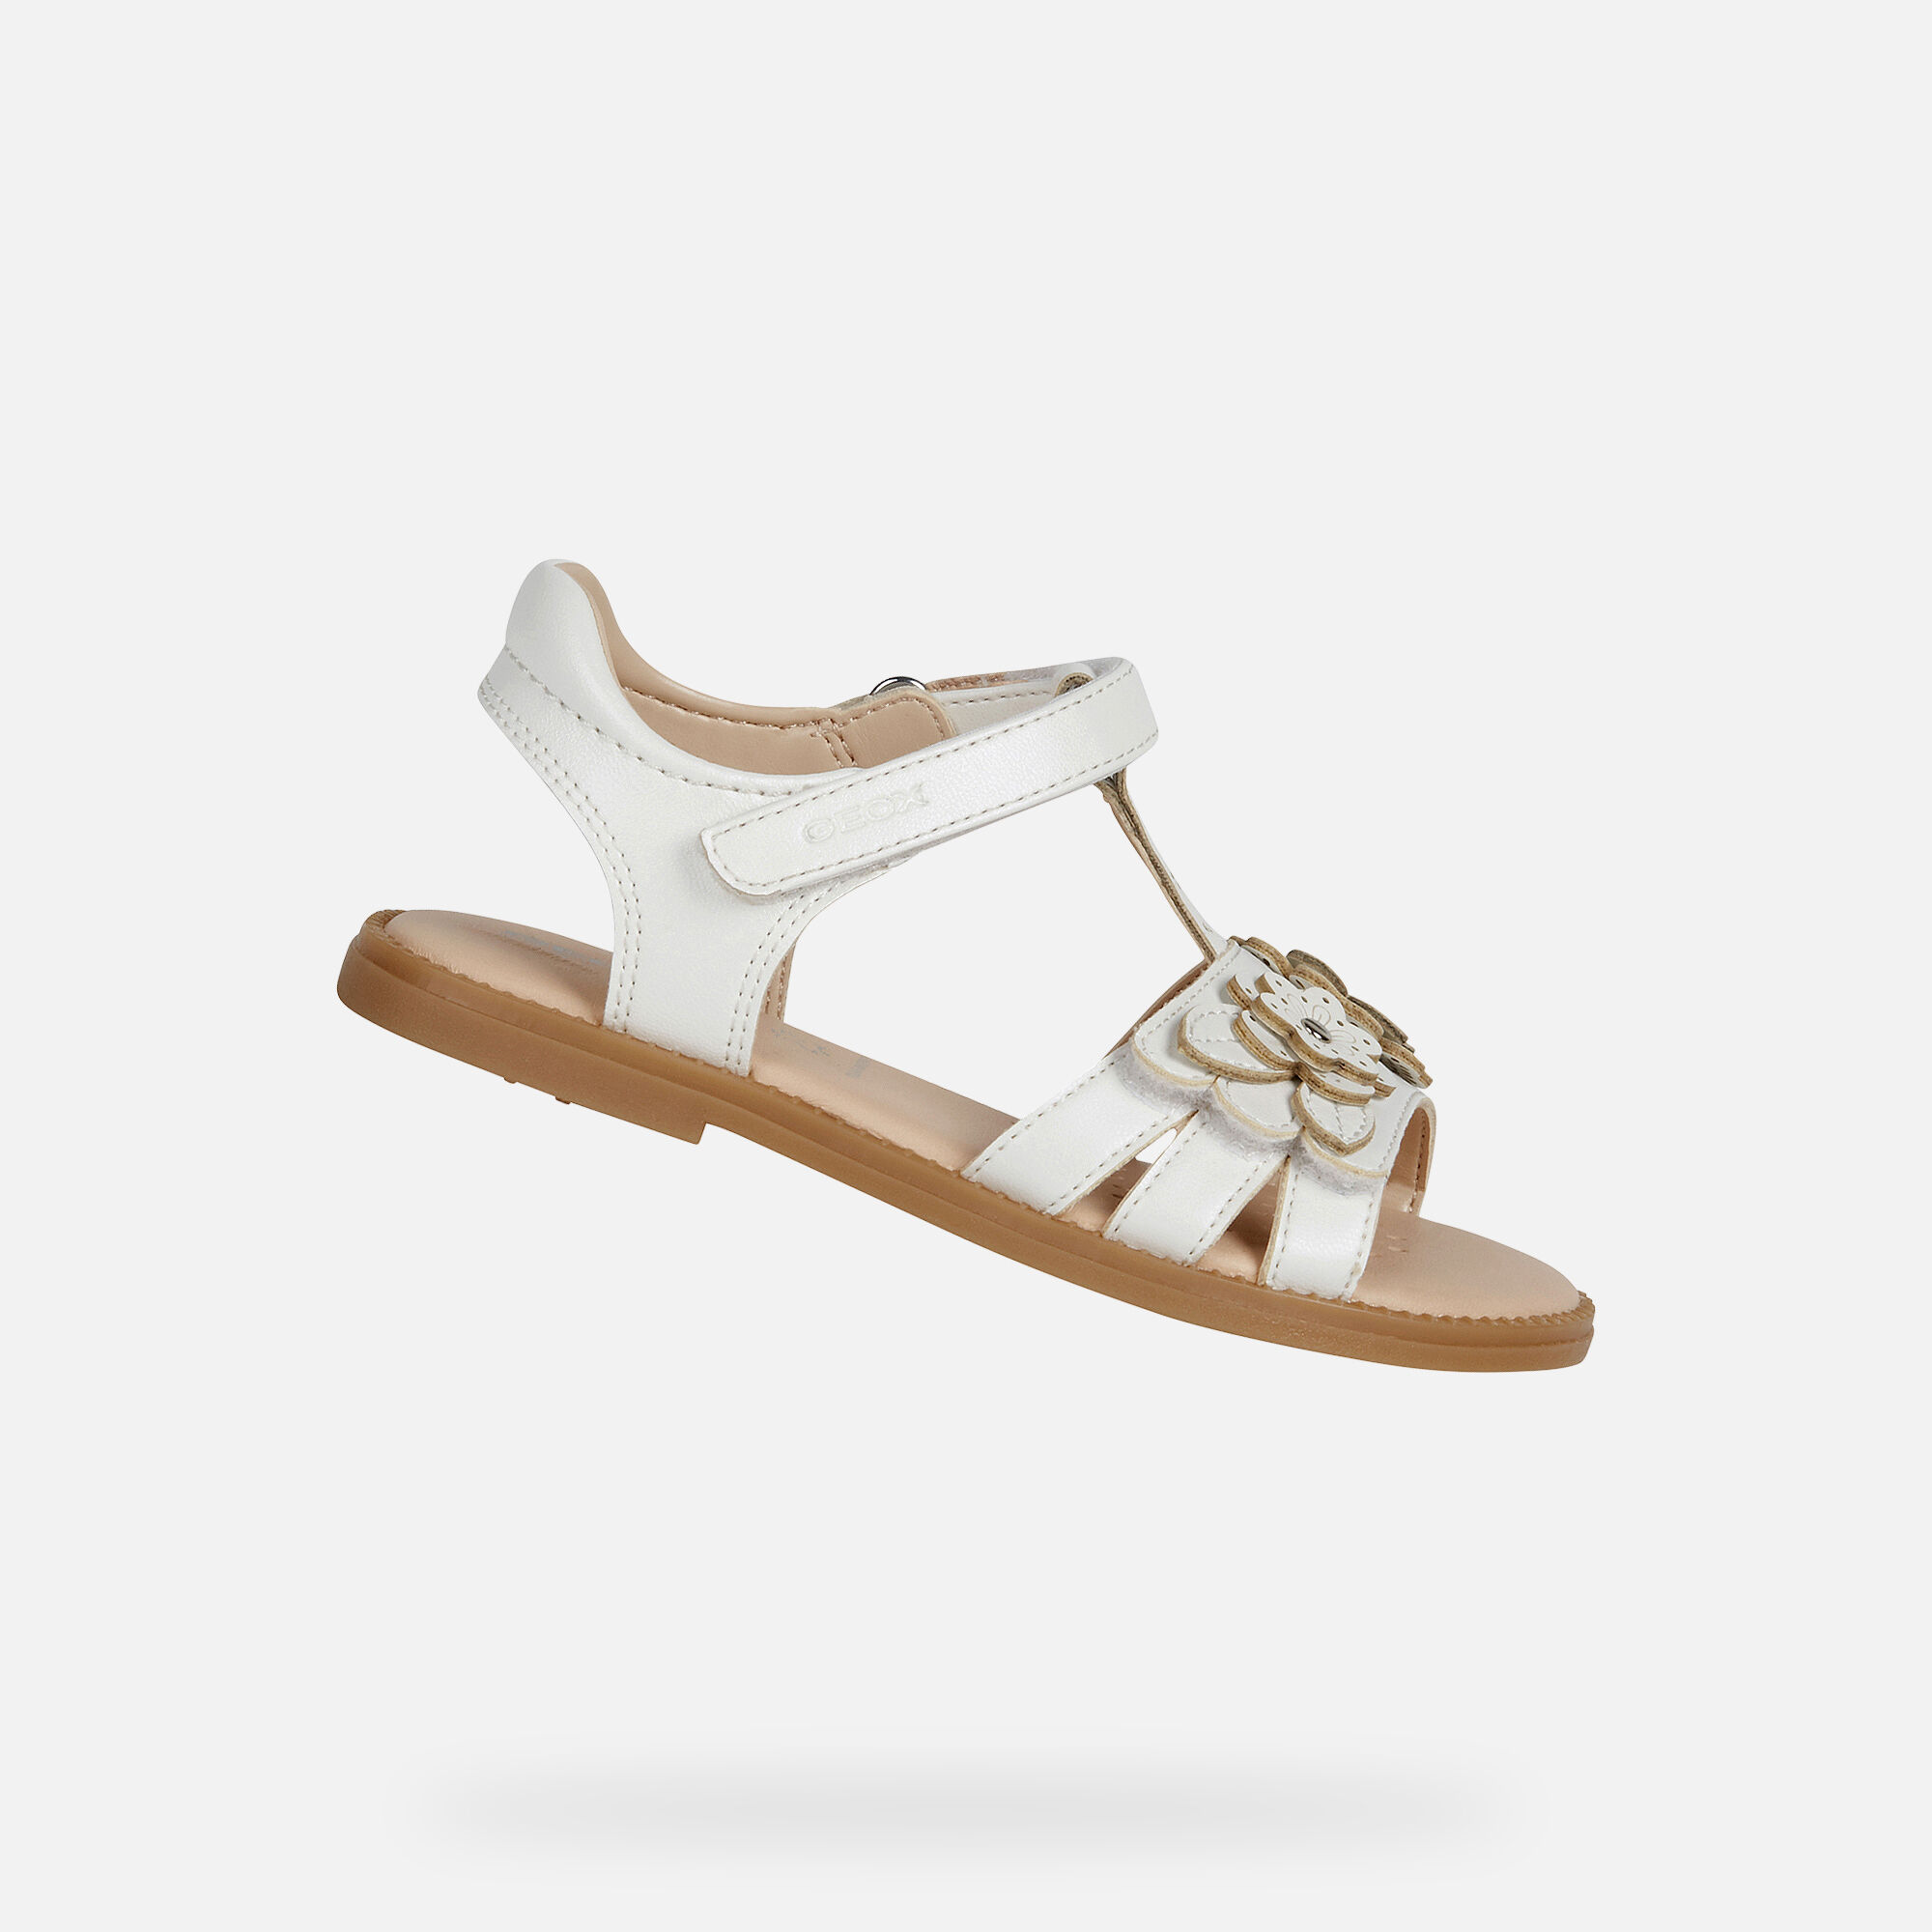 Geox KARLY Girl: White Sandals | Geox SS20